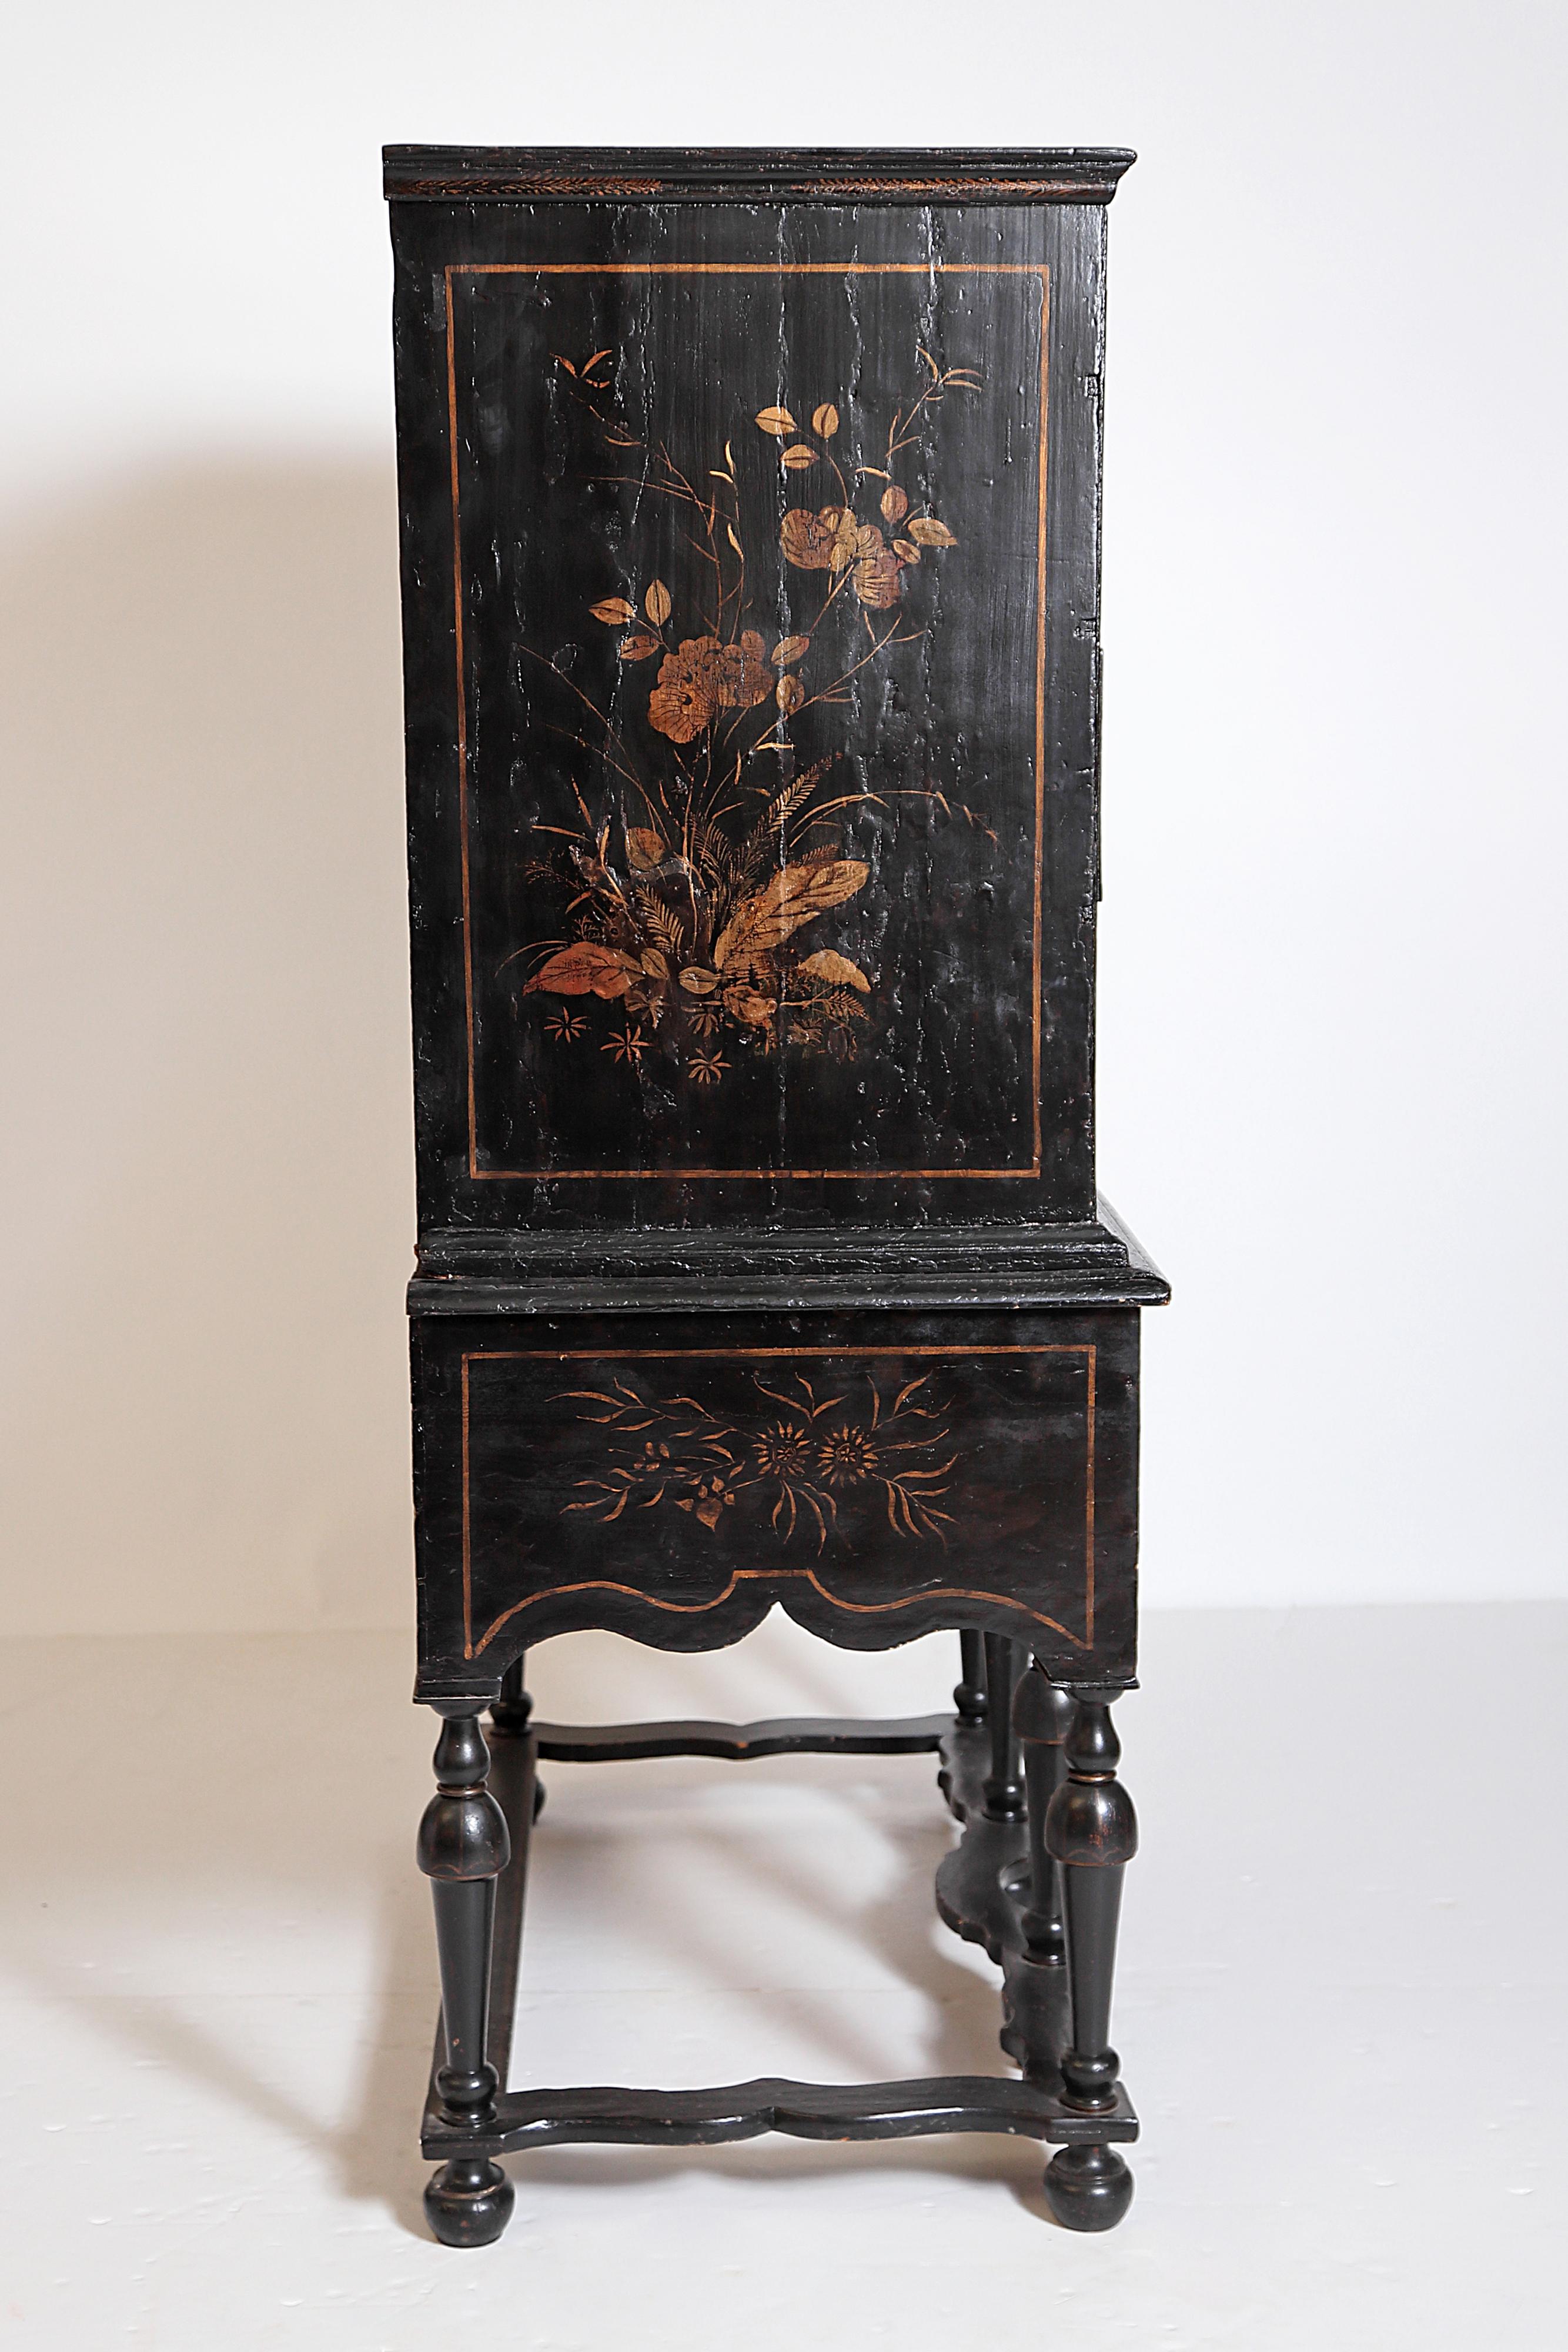 English William & Mary Chest on Stand / Black Lacquer and Gilt Chinoiserie Decoration